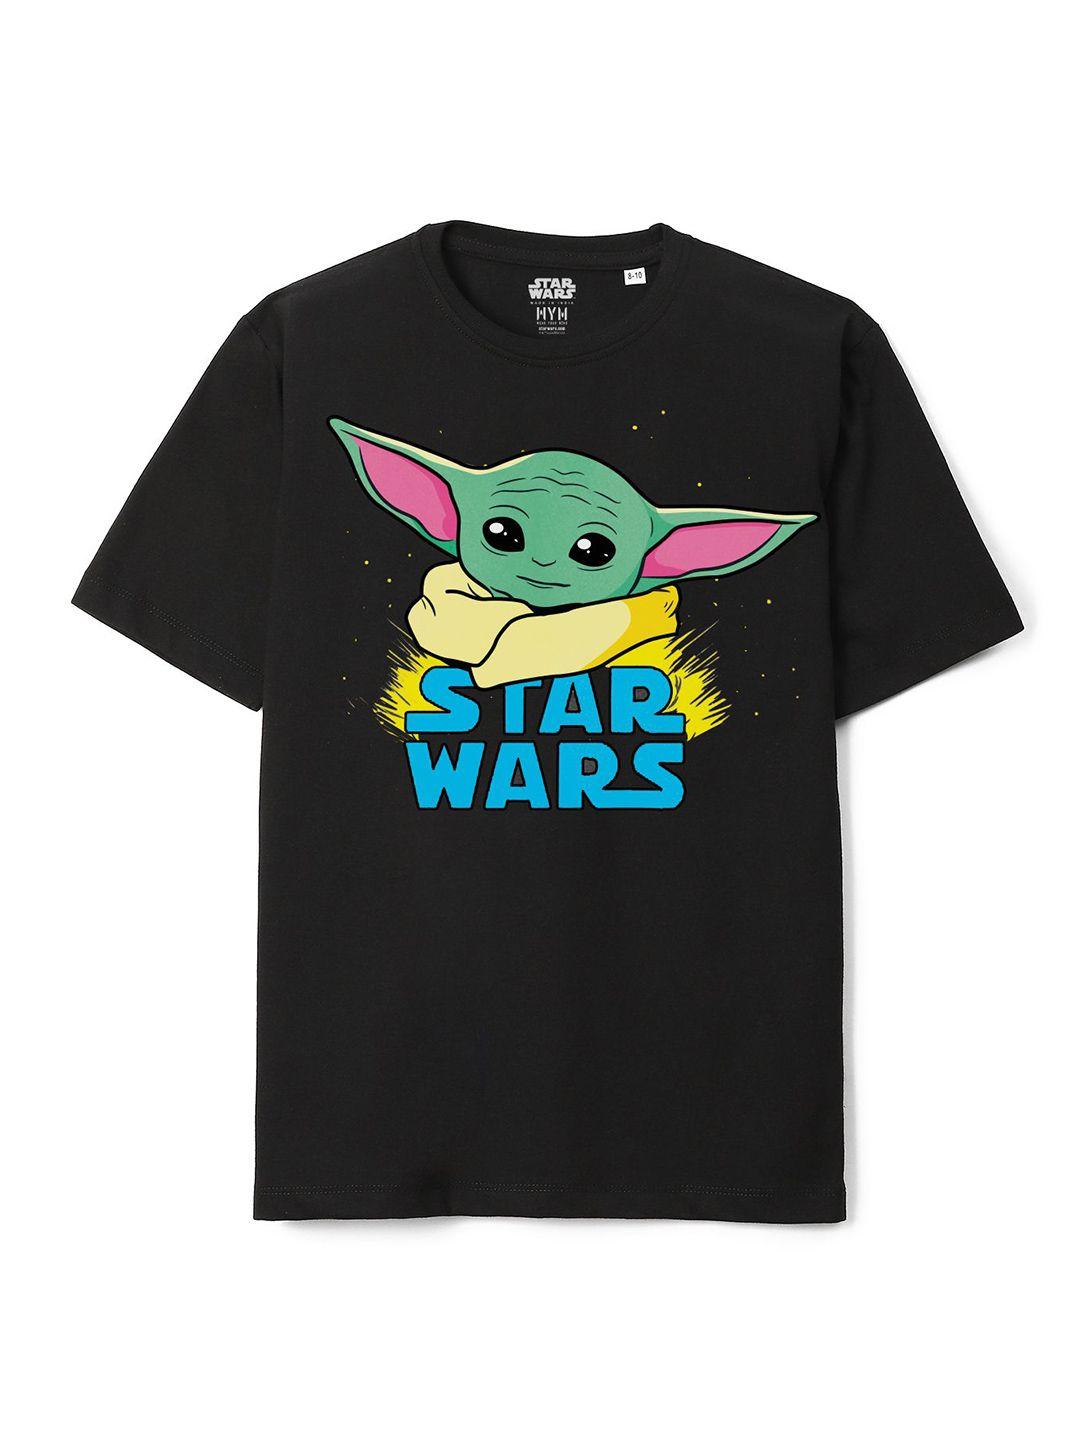 wear-your-mind-boys-star-wars-graphic-printed-oversized-cotton-t-shirt